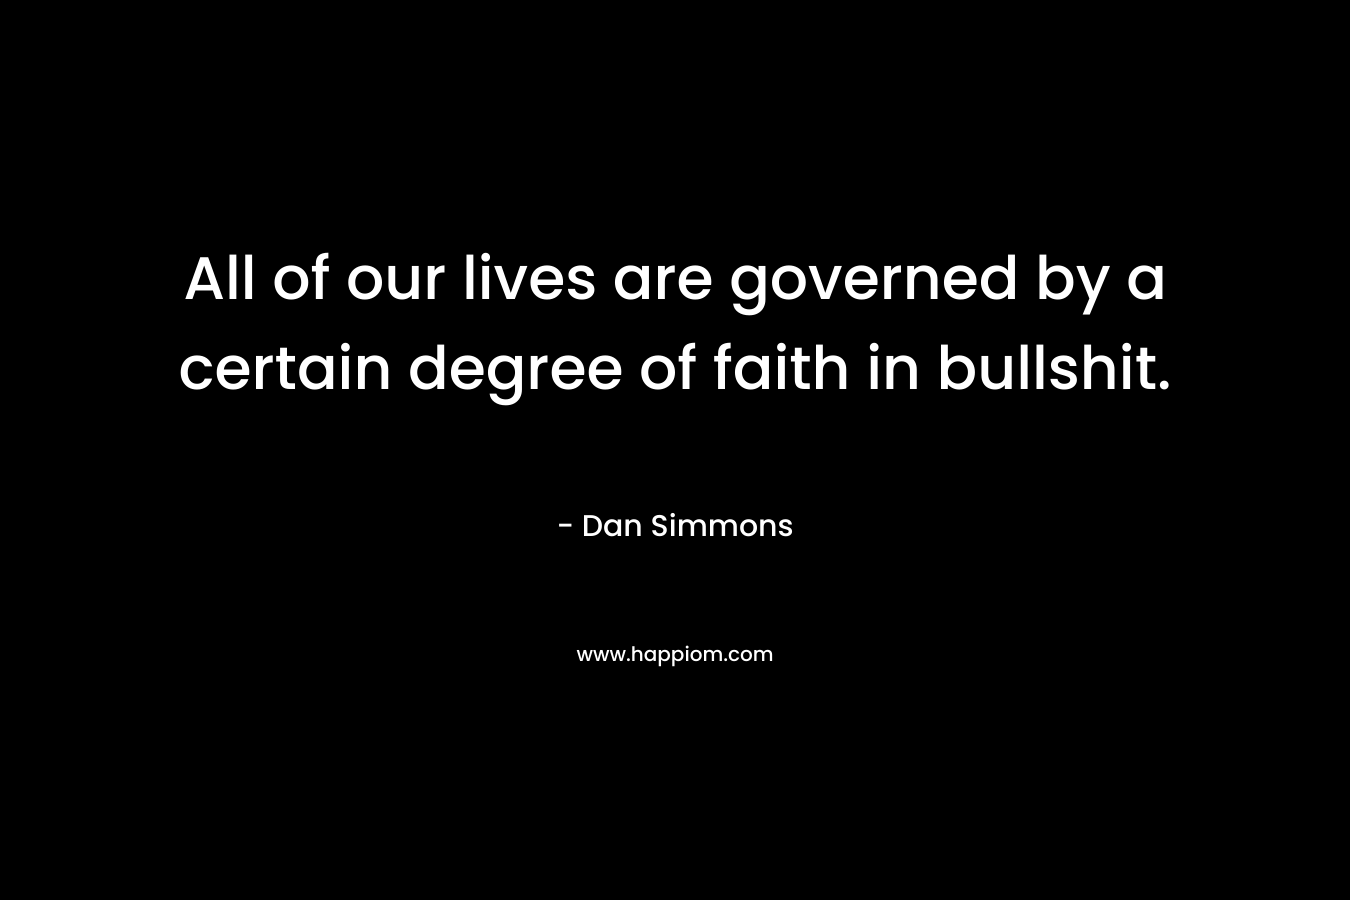 All of our lives are governed by a certain degree of faith in bullshit. – Dan Simmons